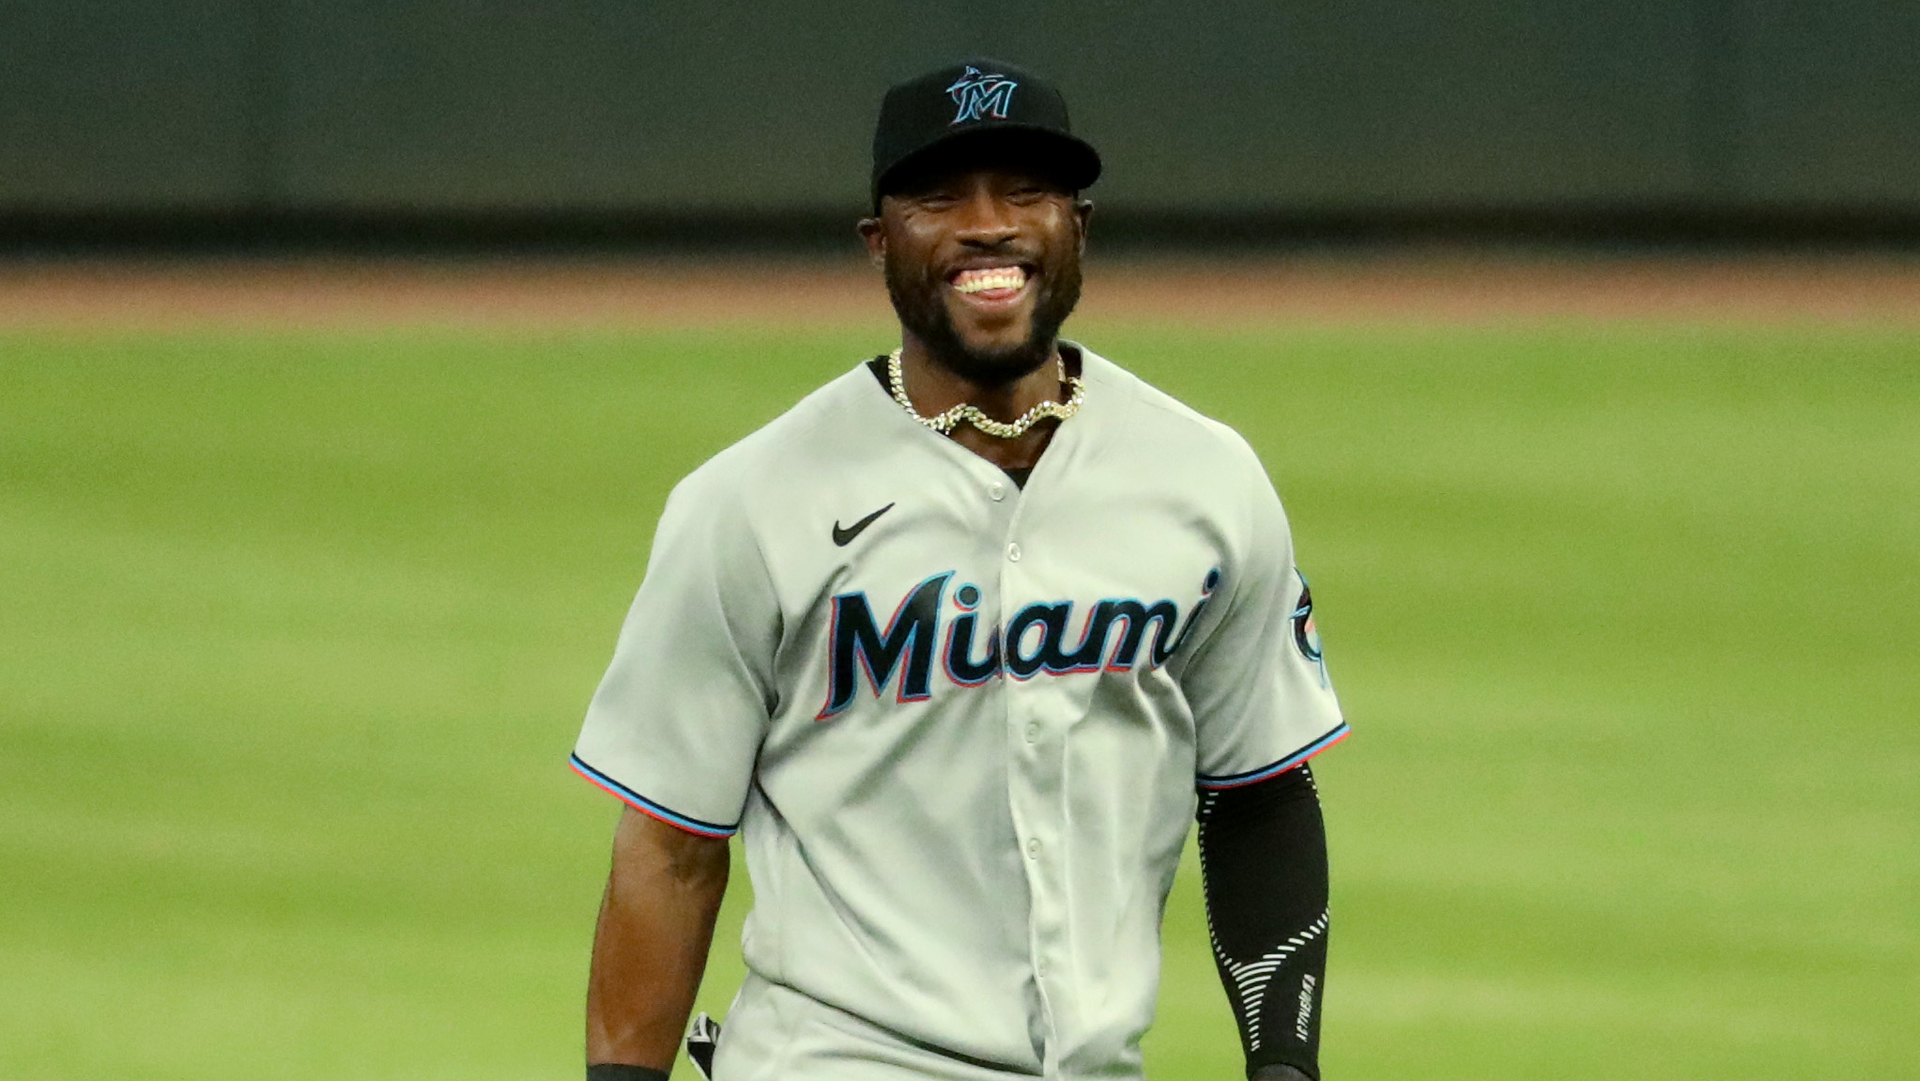 2021 MLB Preview: Ranking the top 20 outfielders in the league